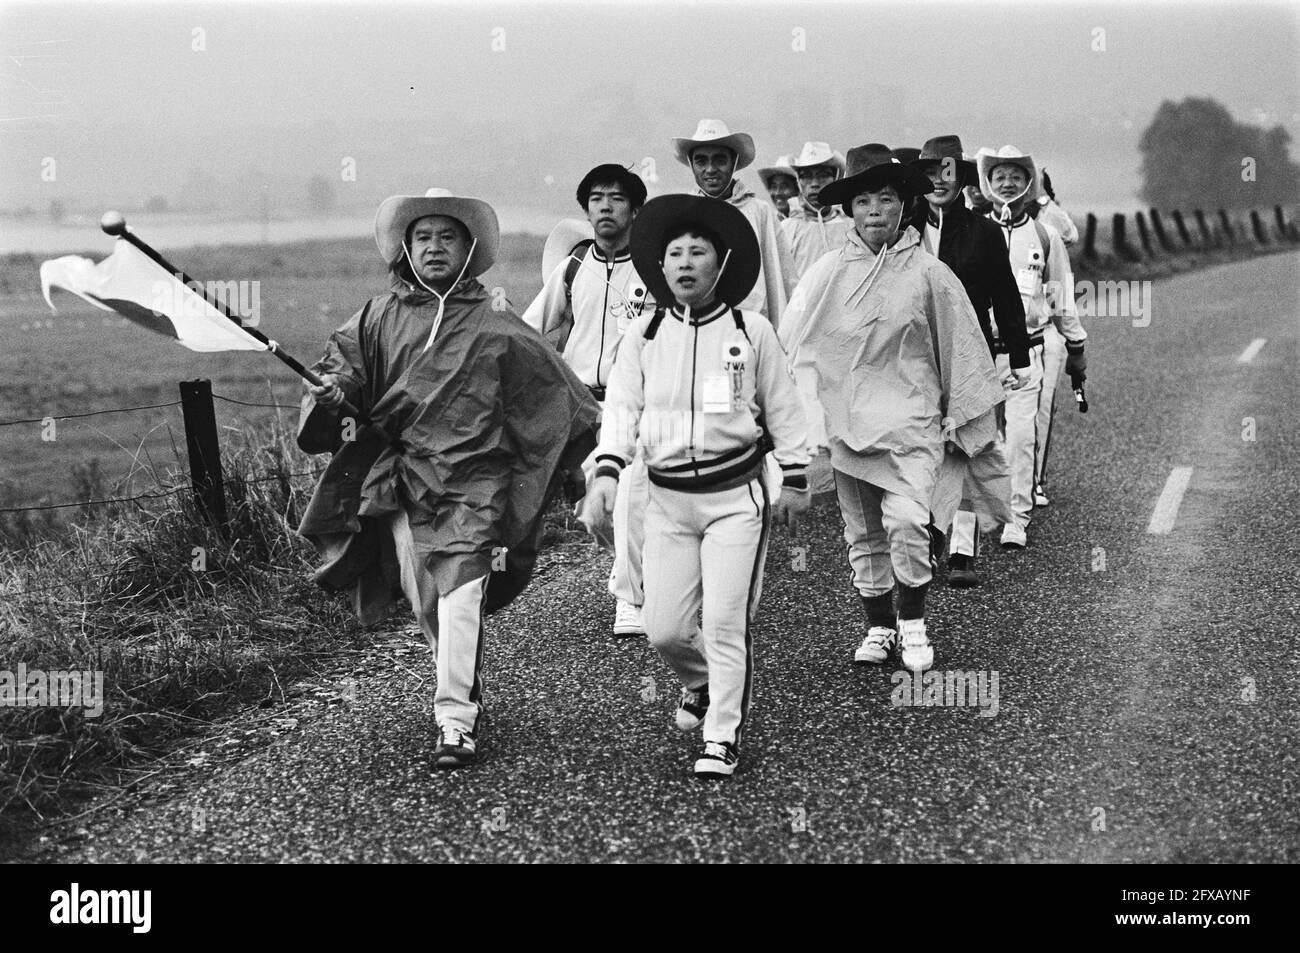 First day; group of Japanese hikers, July 17, 1979, leisure activities, hiking, The Netherlands, 20th century press agency photo, news to remember, documentary, historic photography 1945-1990, visual stories, human history of the Twentieth Century, capturing moments in time Stock Photo